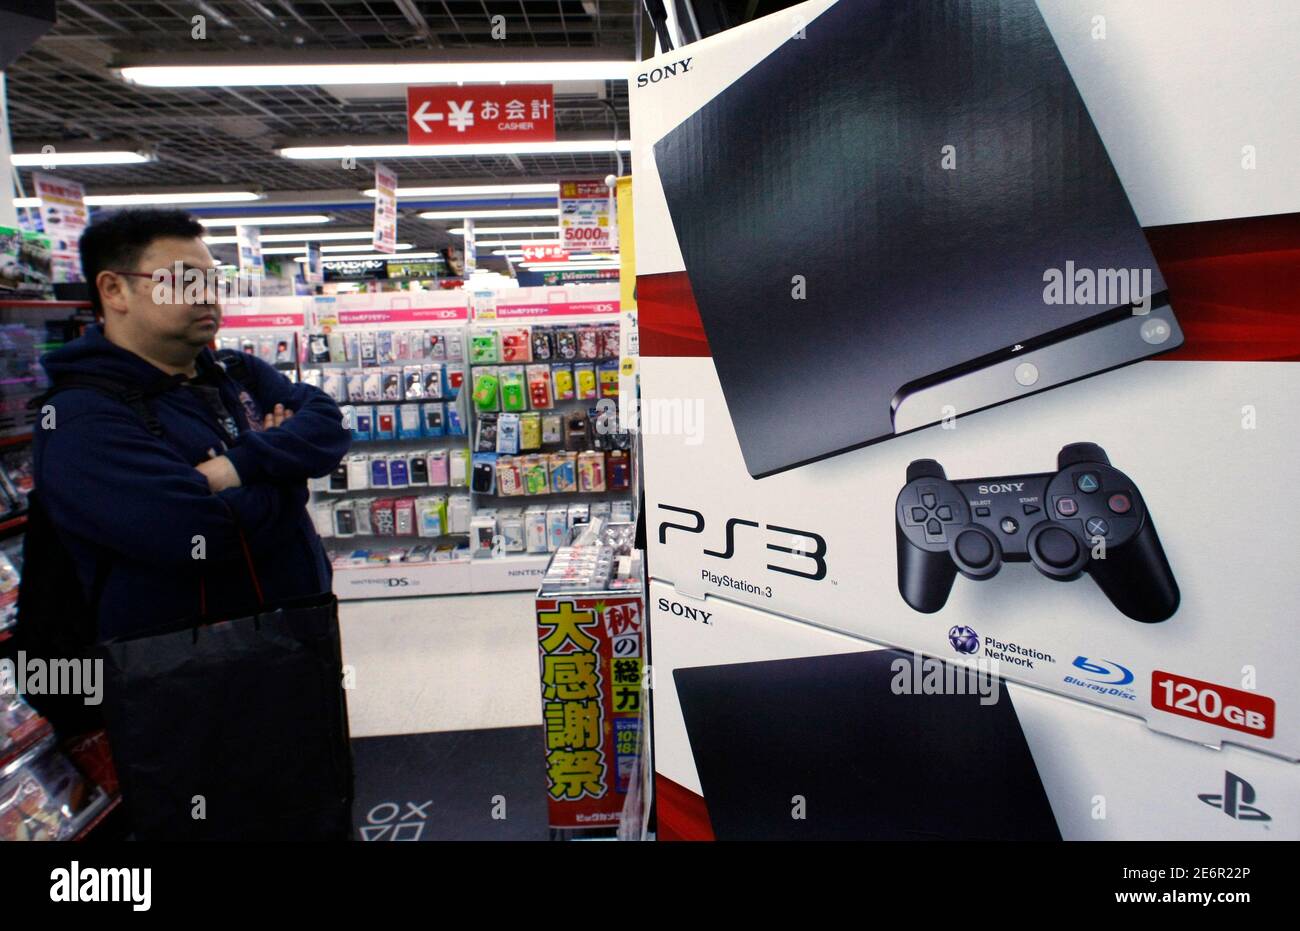 man looks at Sony's PlayStation 3 game consoles at an electronic store in Tokyo October 30, 2009. Sony Corp and Panasonic Corp signalled the may be for the world's